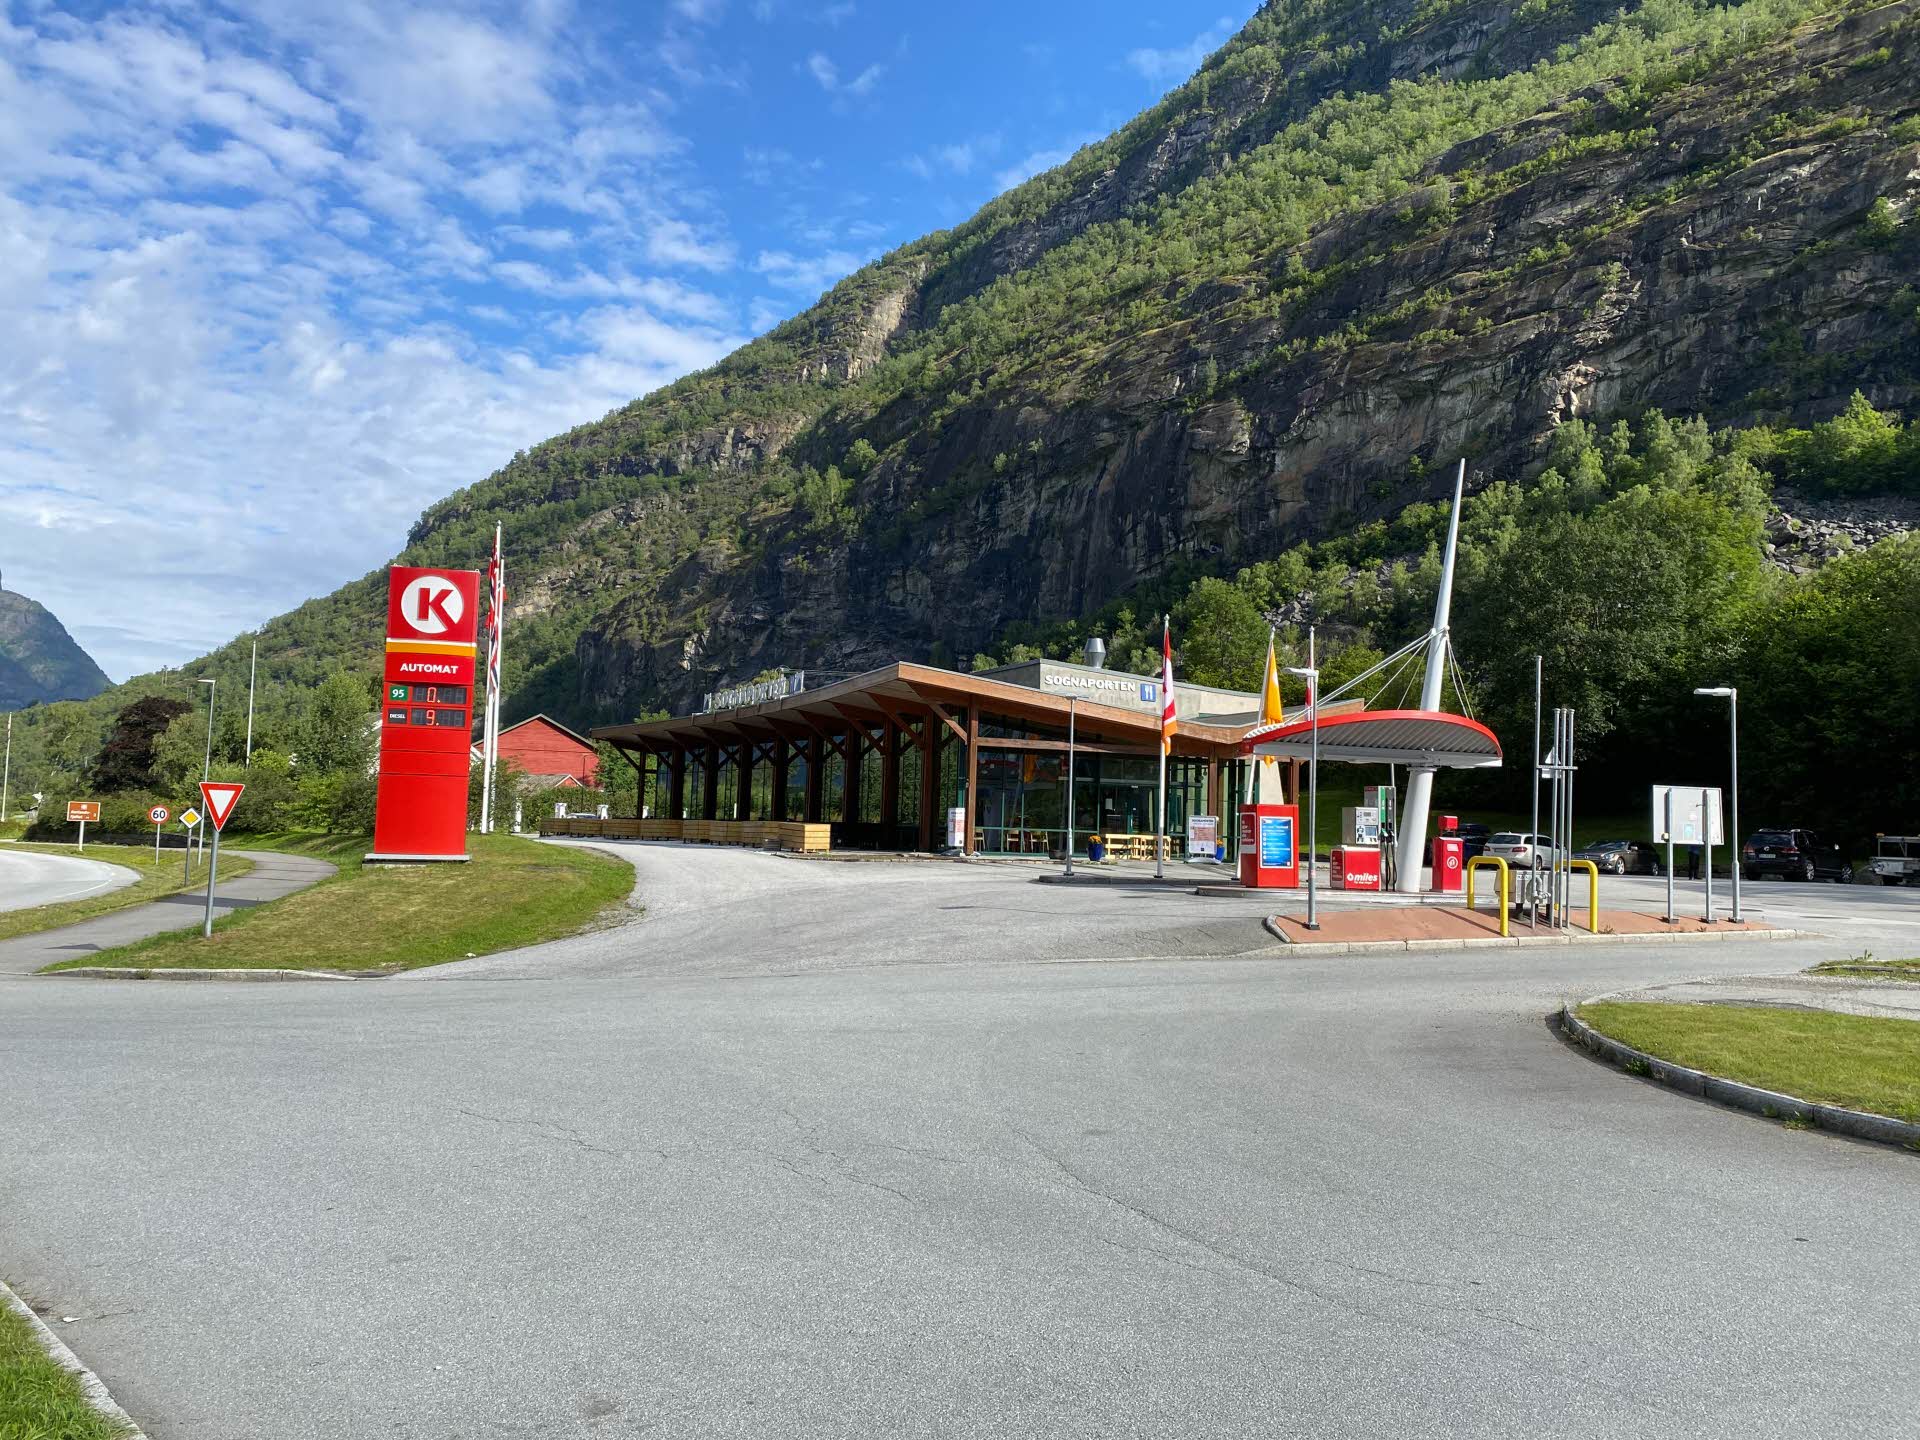 Sognaporten café and gas station seen from the road in summer. 